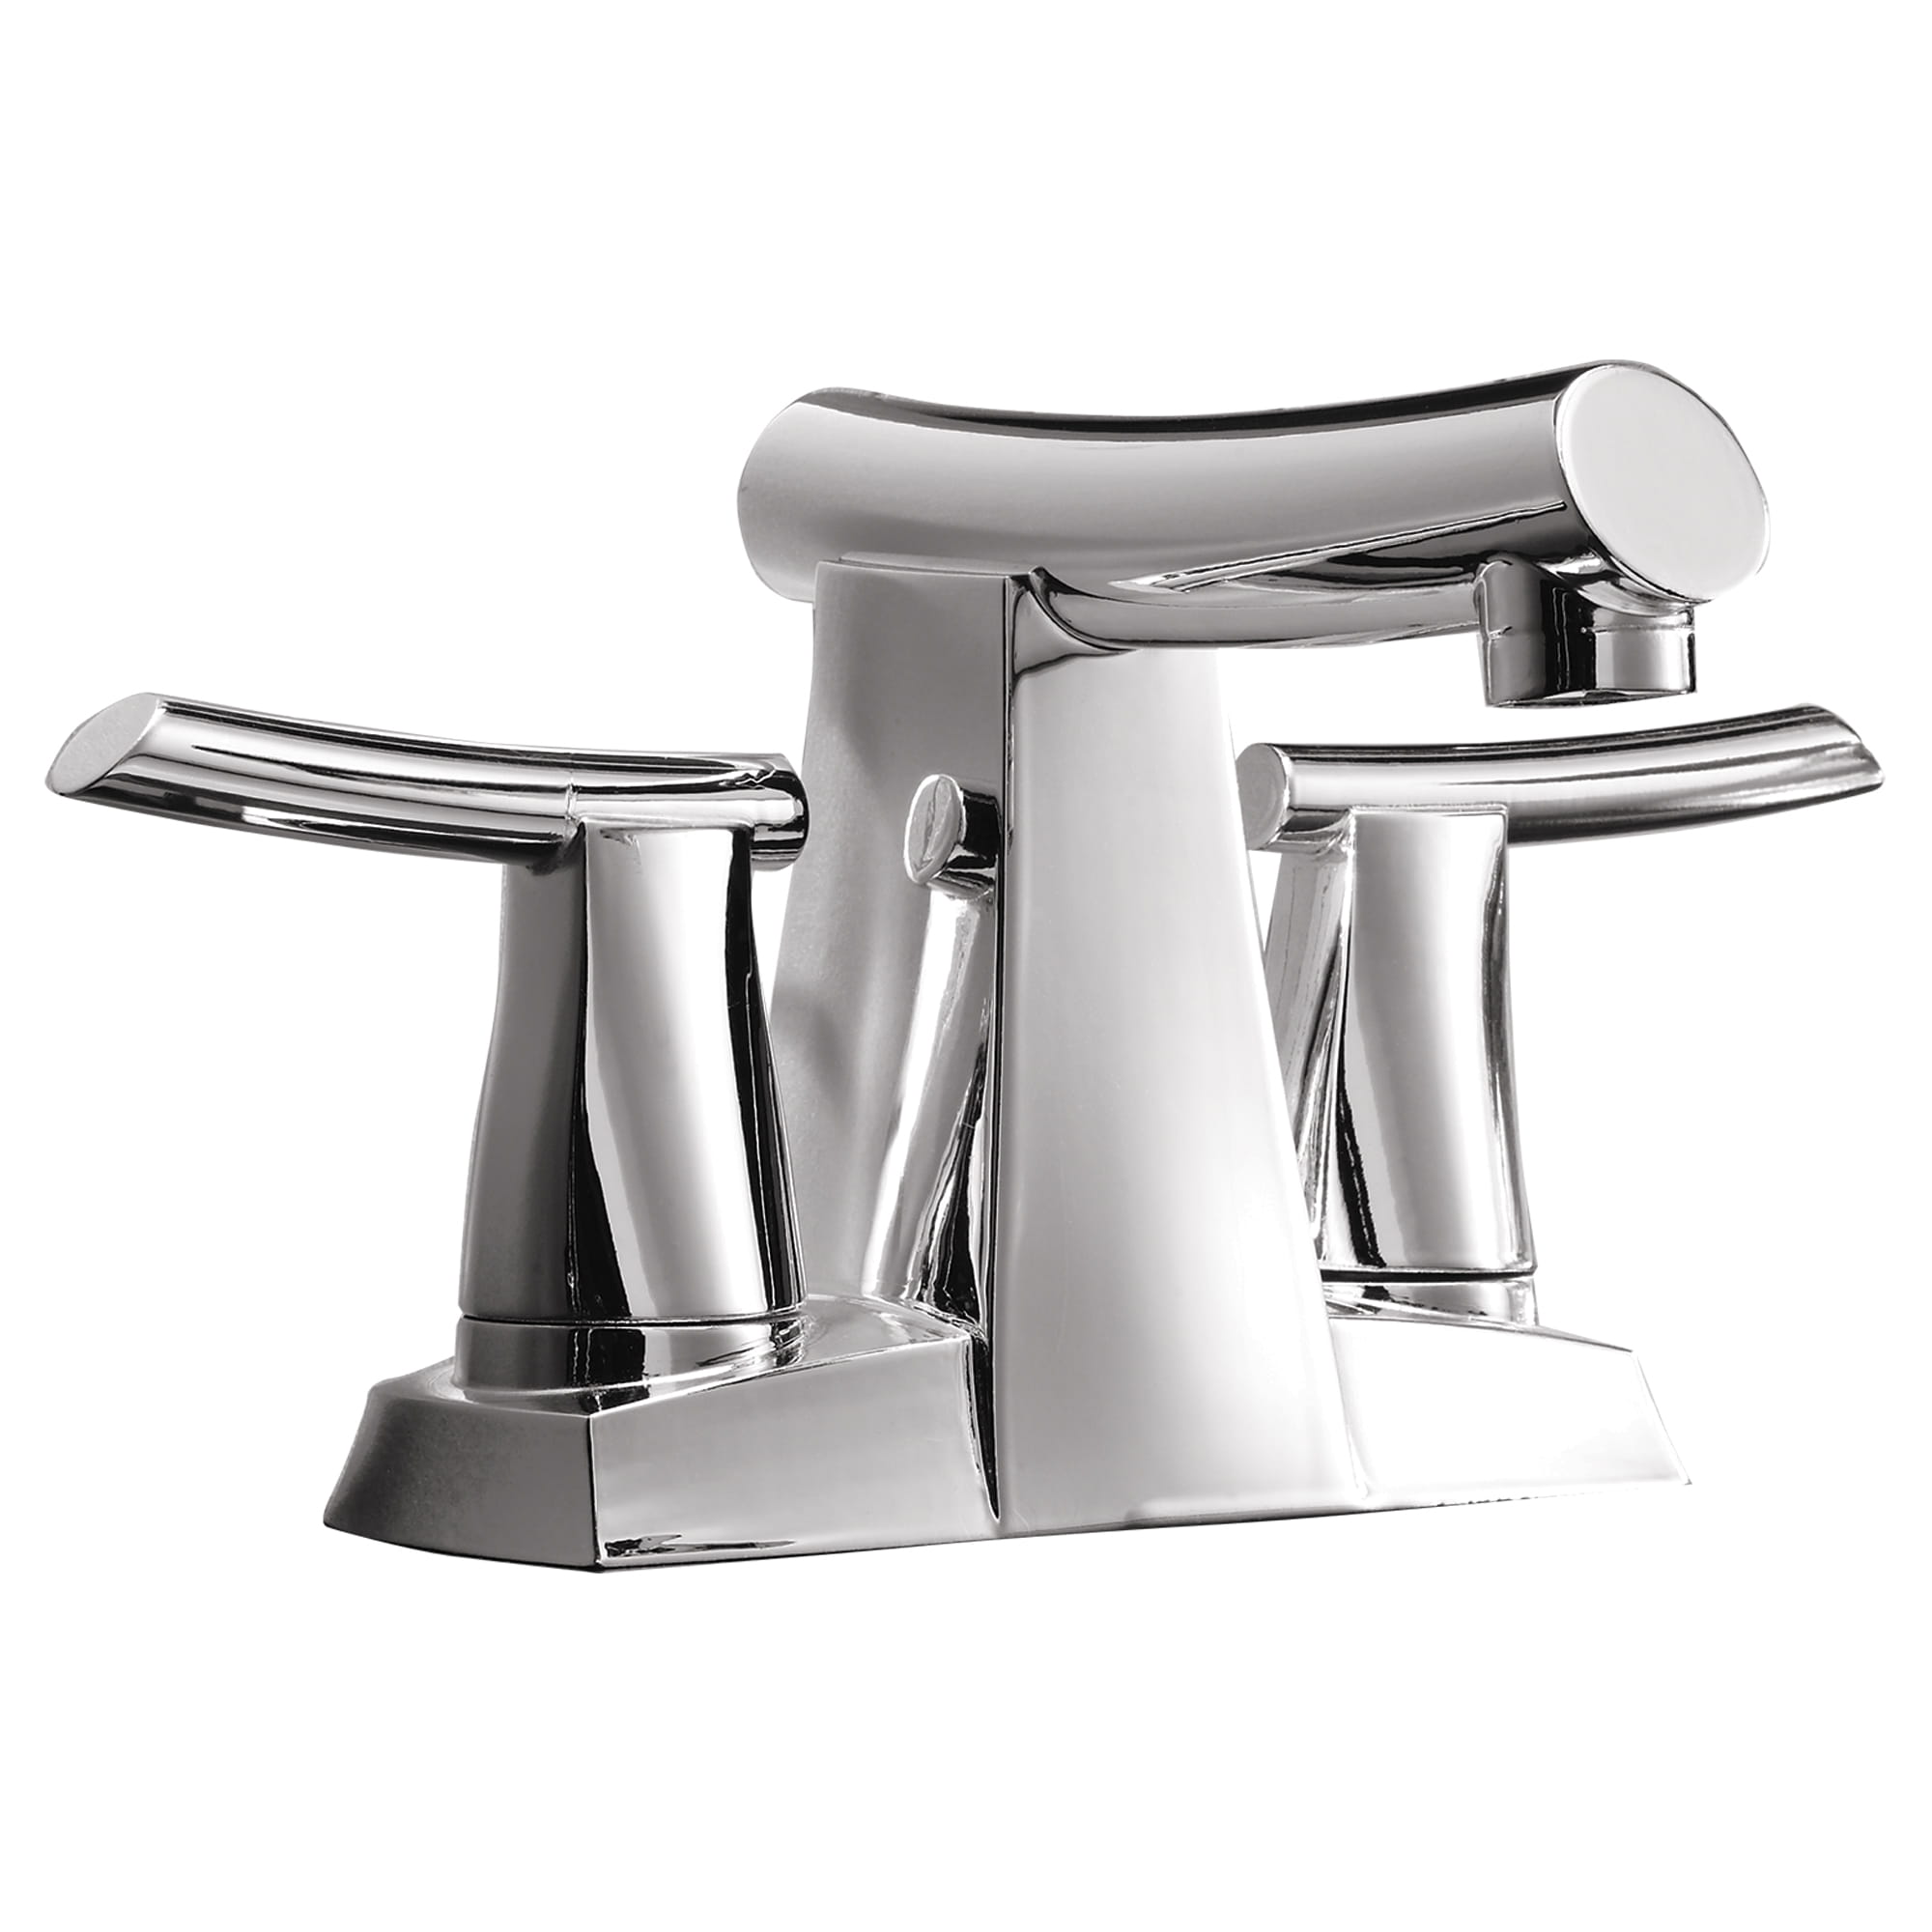 Green Tea 4 Inch Centerset Pull Out Bathroom Faucet CHROME